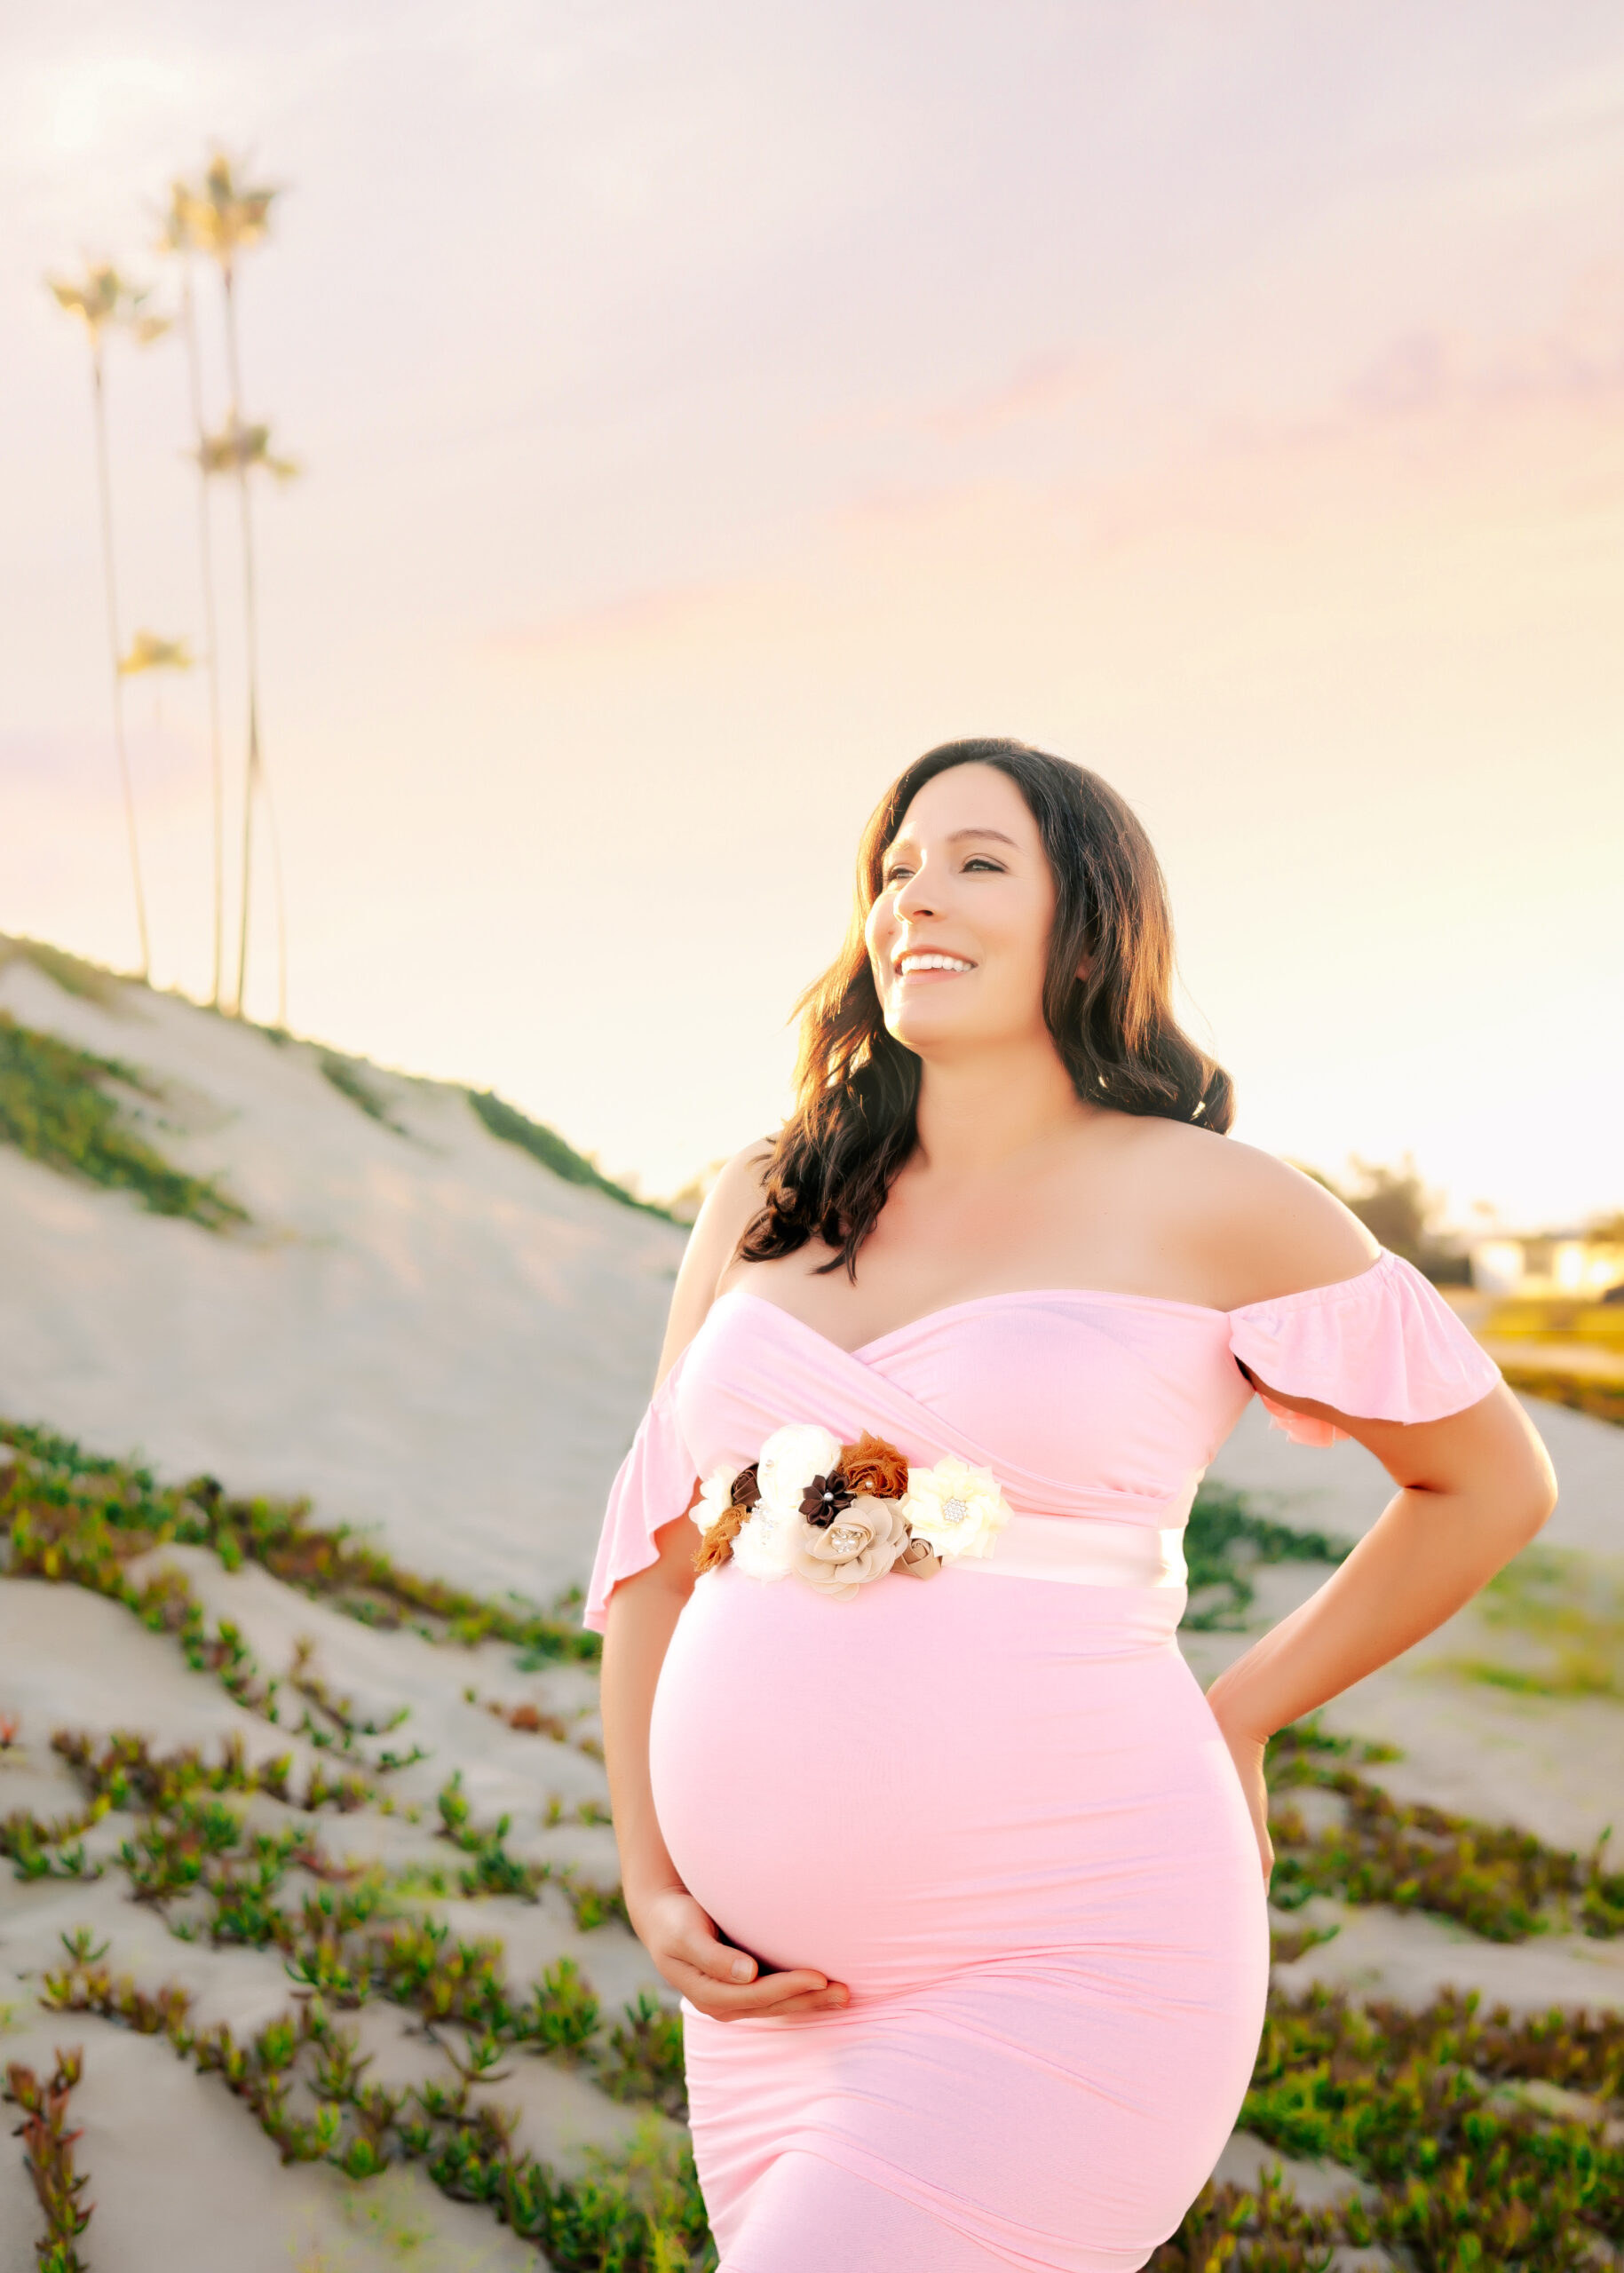 Expectant Mama gazing off in the distance holding her baby bump during golden hour beach maternity session Seal Beach, CA by Ashley Nicole.